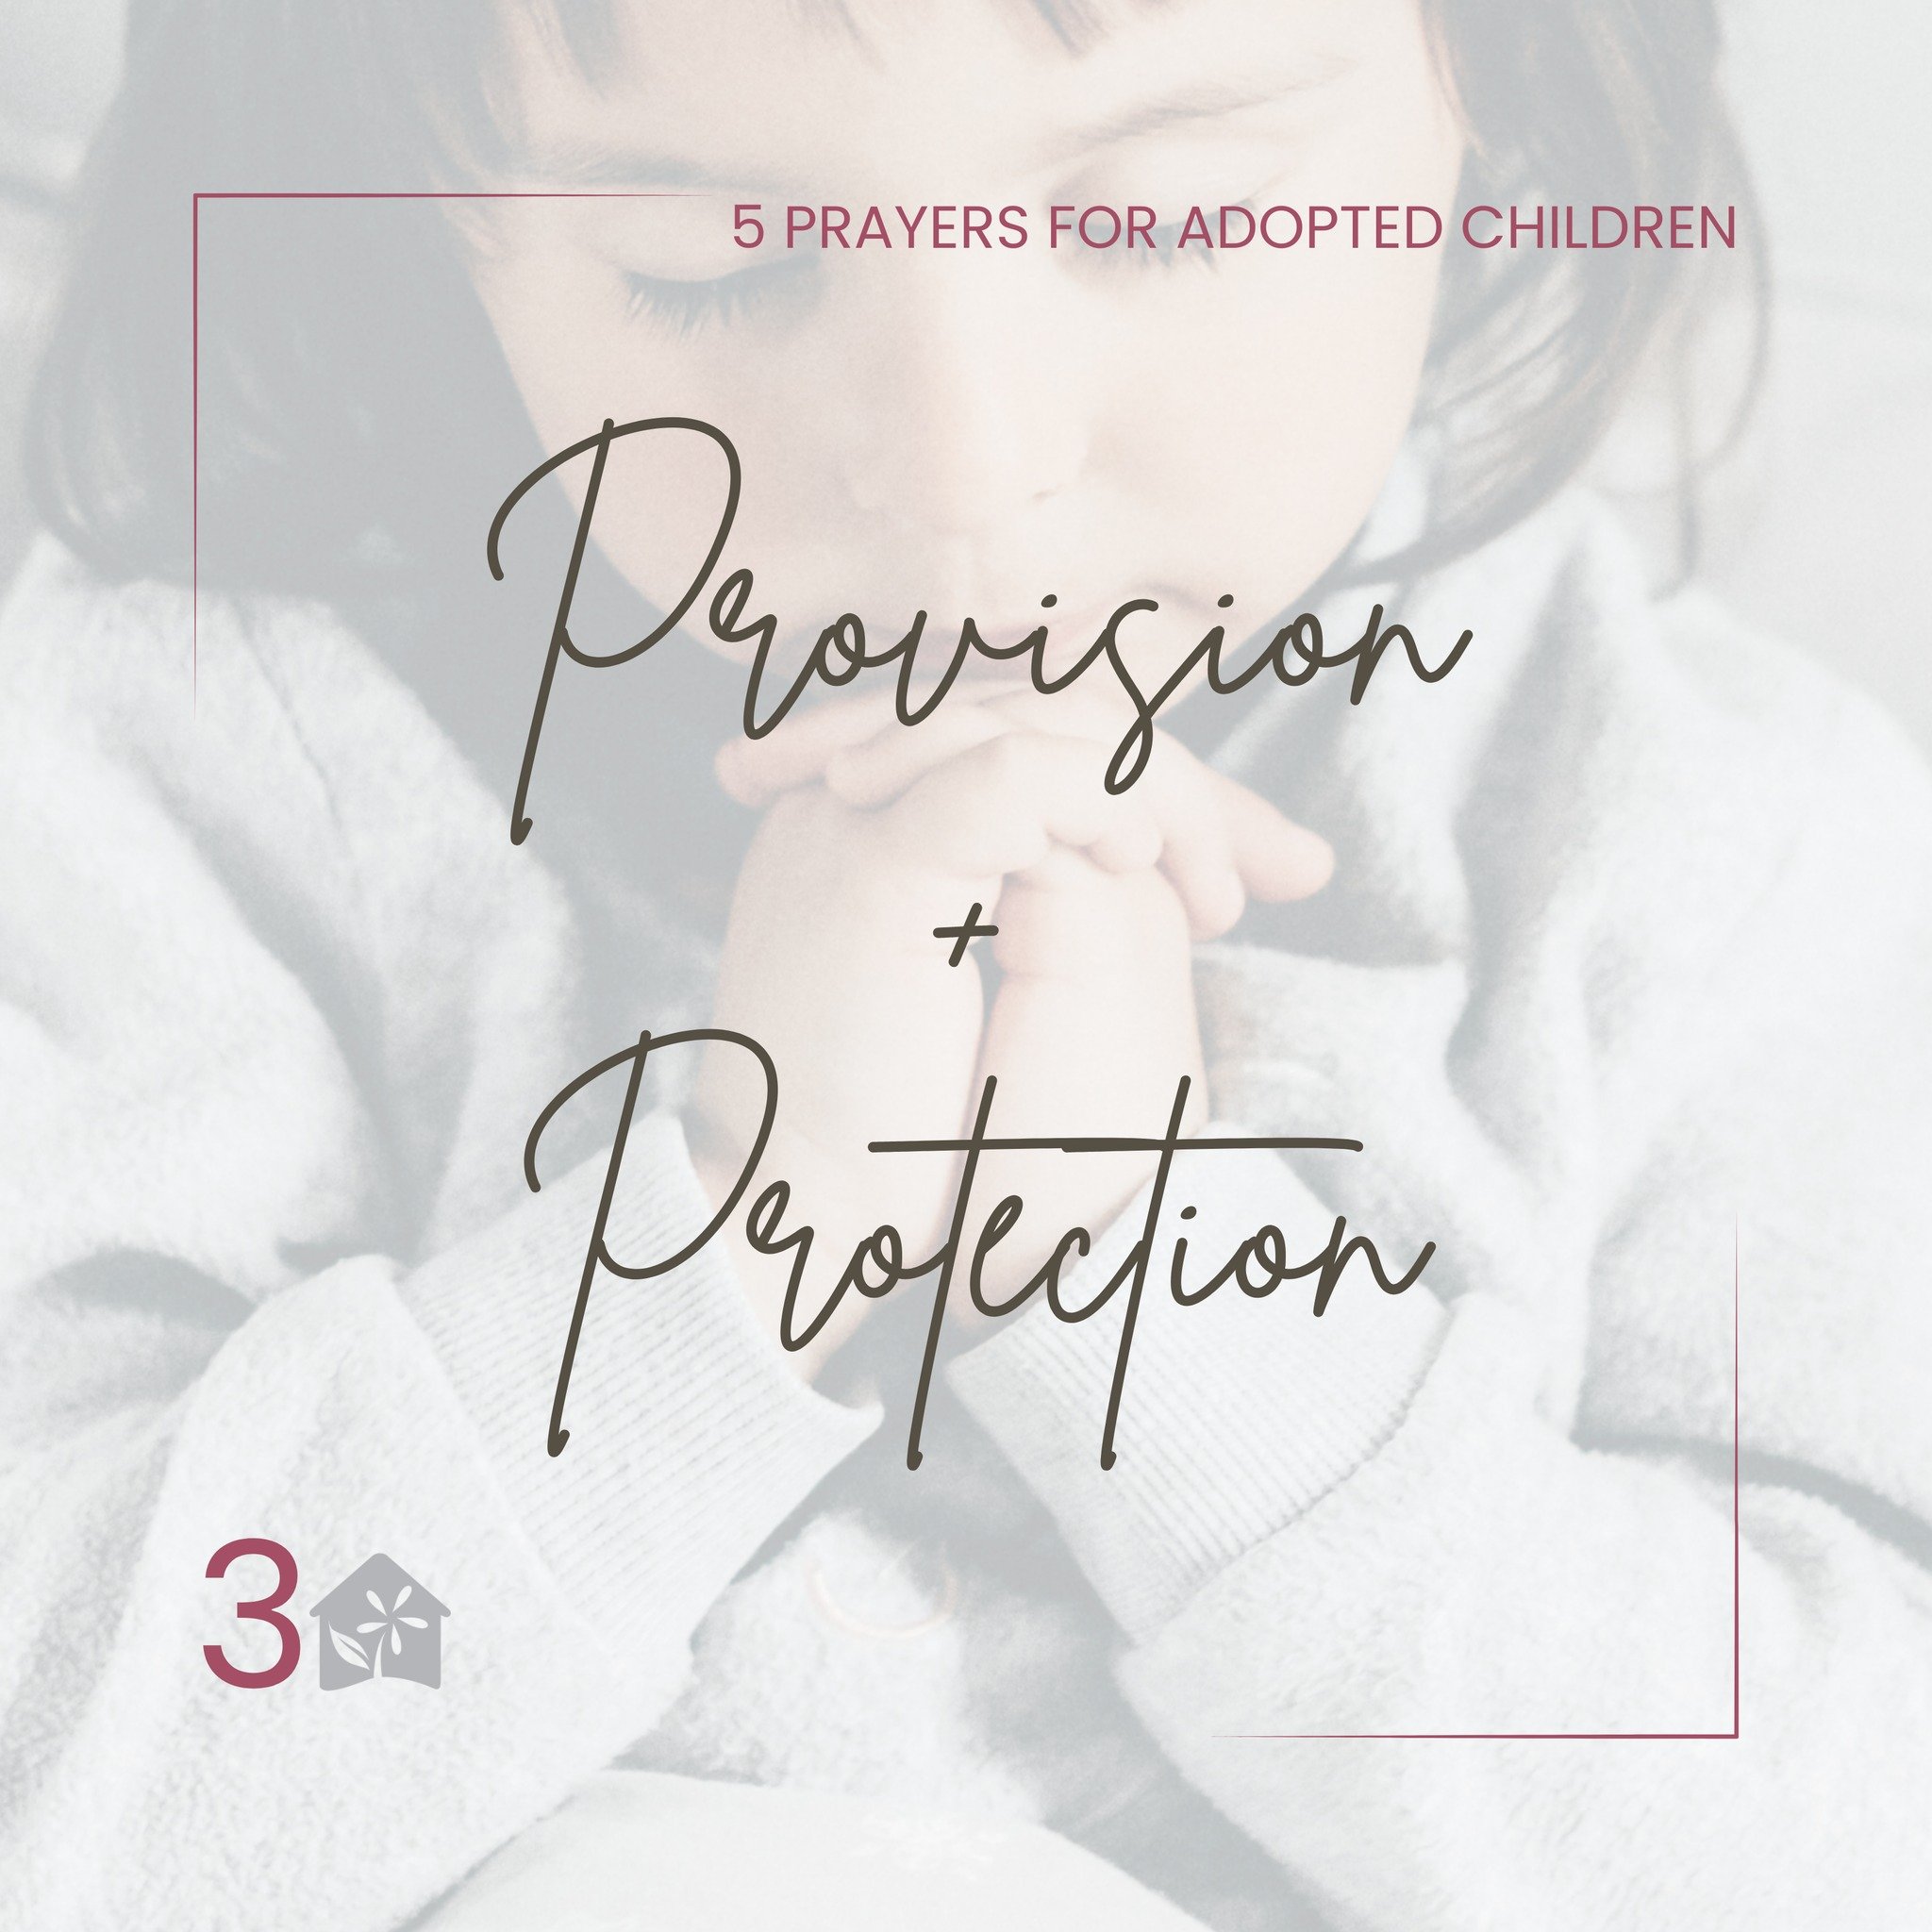 Pray for adopted children to find stability and security in their new homes, for their provision and protection, and that their basic needs will be met with abundance and generosity. 🙏 

https://www.romania-reborn.org/blog/5-prayers-for-adopted-chil